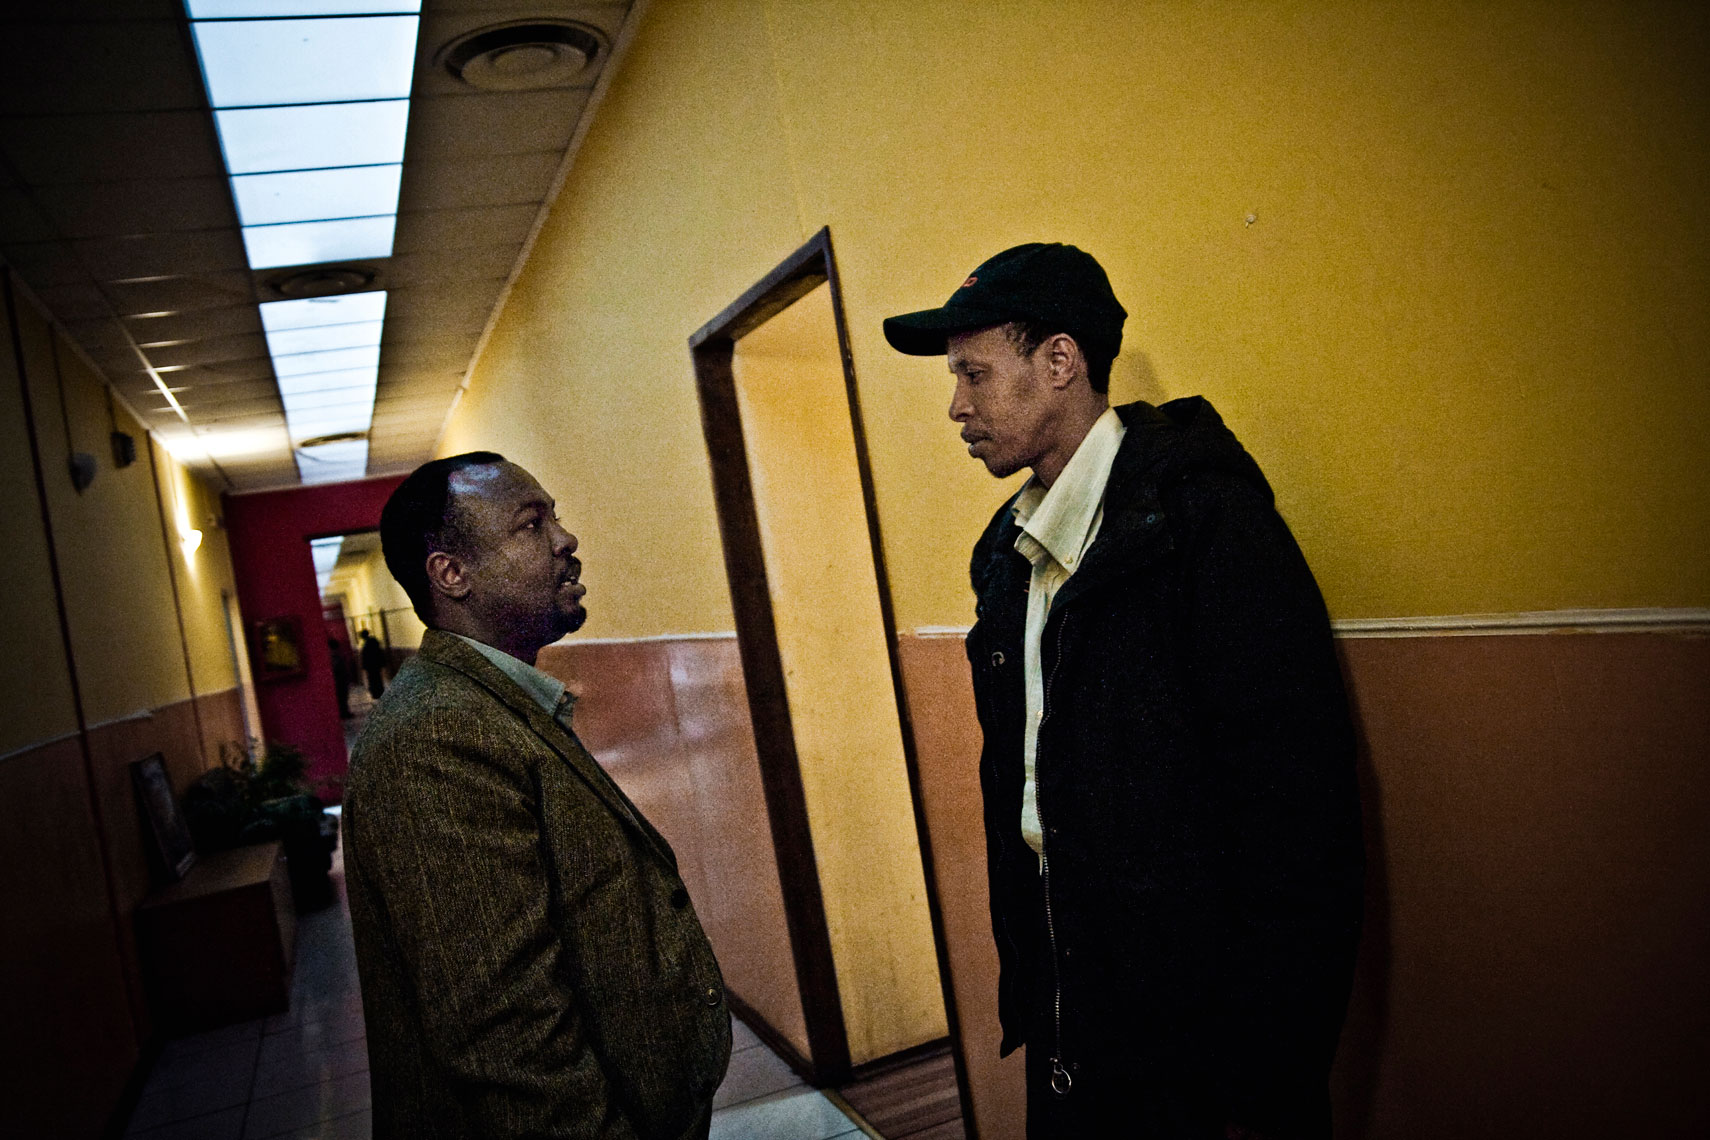 ITALY. Rome, 30th March 2011. Inside the "Baobab" welcome center. Amin, on the left, a refugee that helps other somali refugees to ask for papers and a place to live, talks to one host of the center.